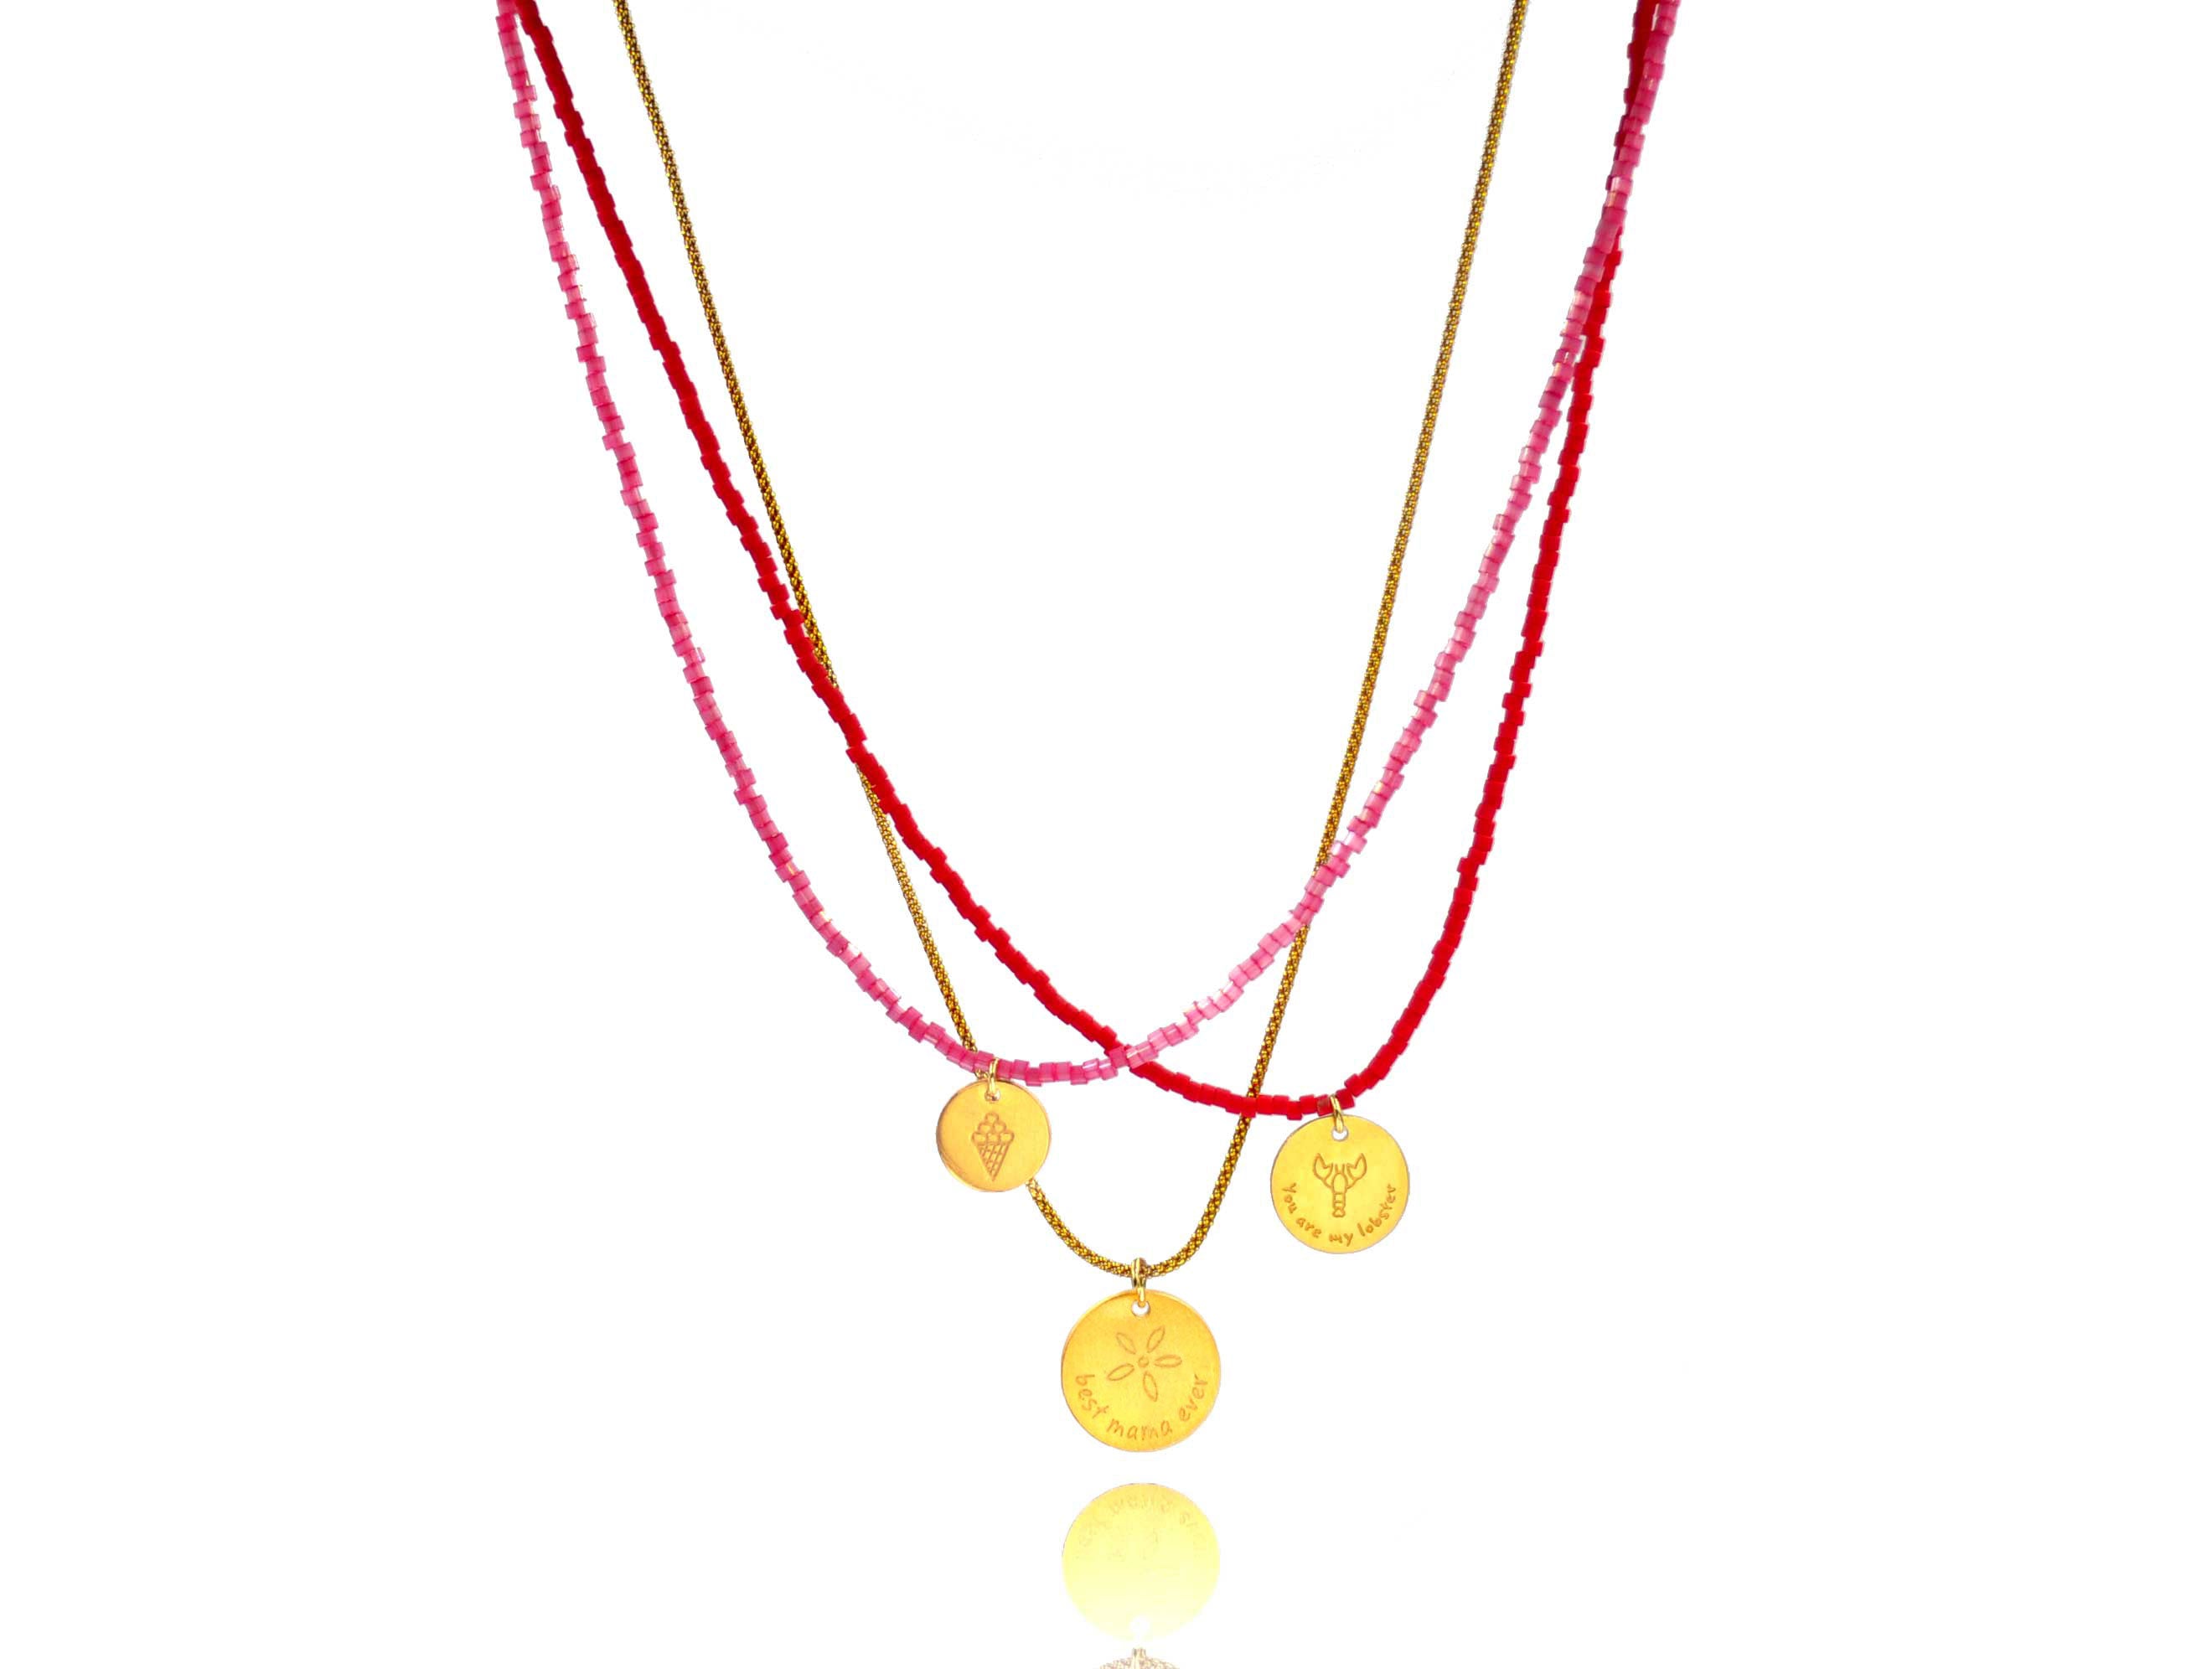 A combo in red tones of 3 necklaces made of japanese miyuki beads, silver 925 gold plated chains, combined with silver 925 gold plated round charms with messages.